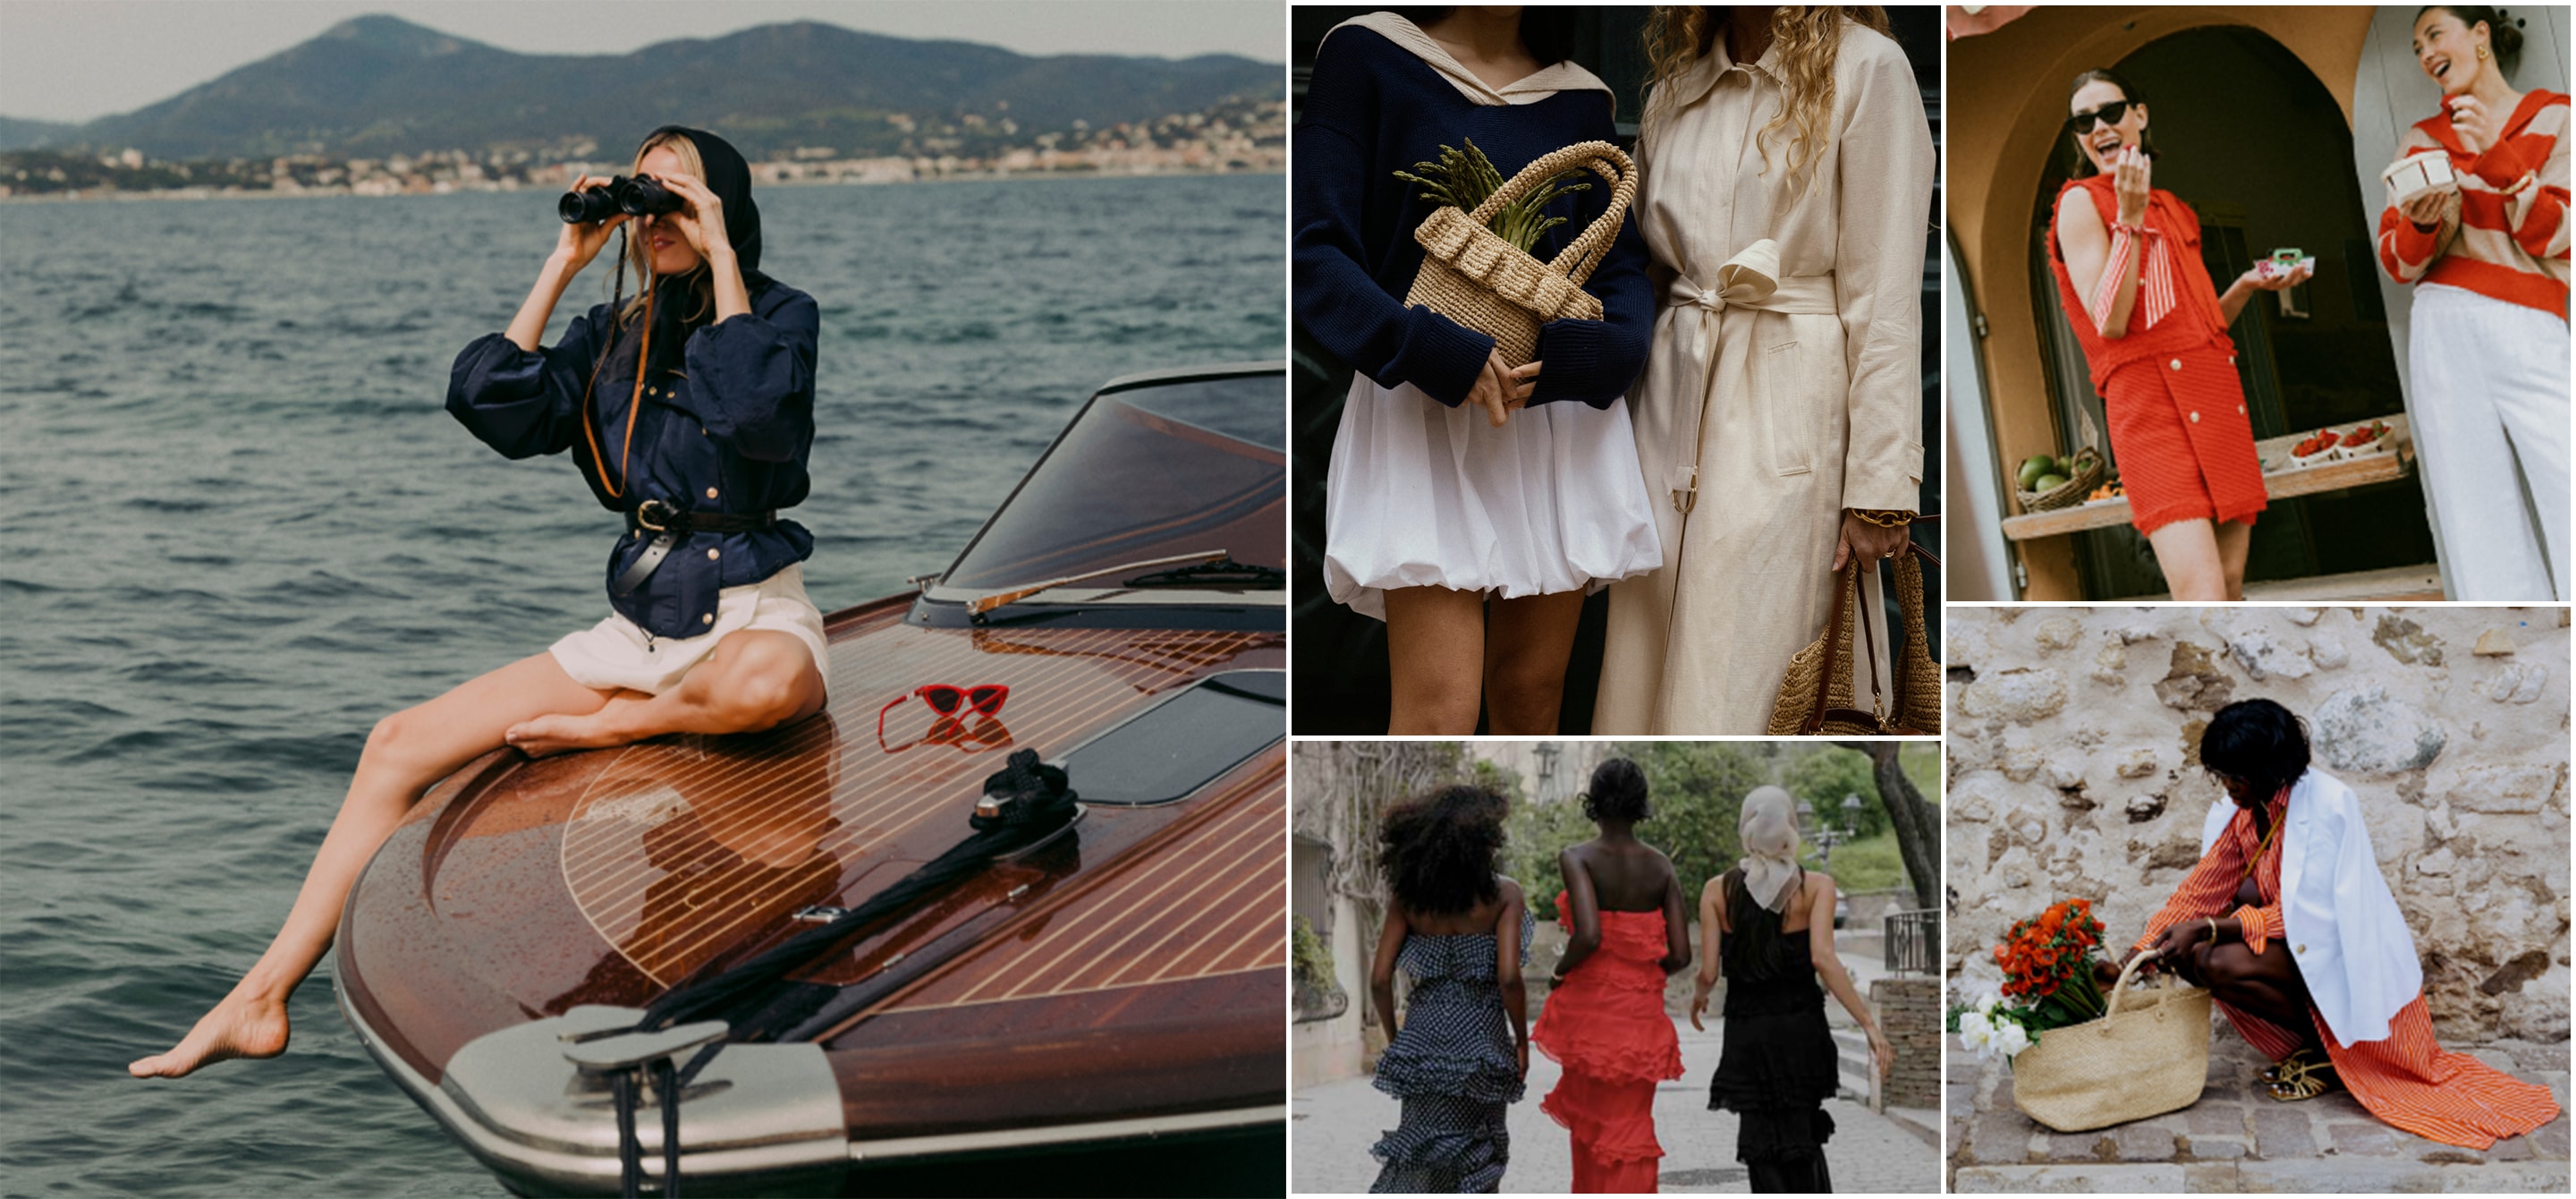 A French Persuaion: J.Crew in St. Tropez